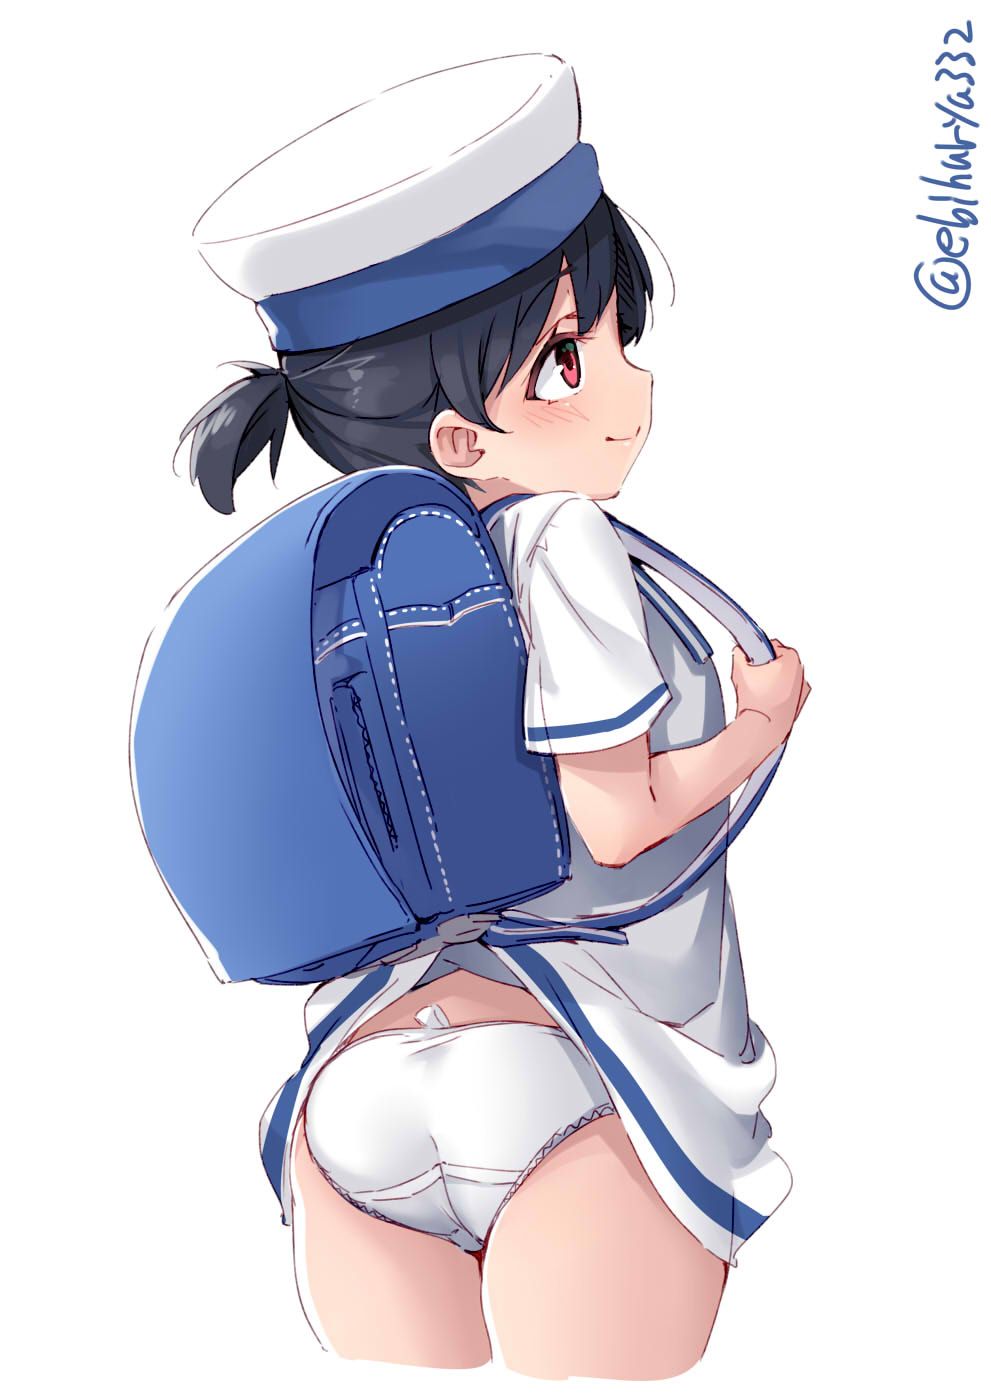 [Sun Peng-chan (ship this)] secondary erotic image of a cute Day swing of Sailor Dress in the Lollipedo sea defense ship of the fleet collection 7